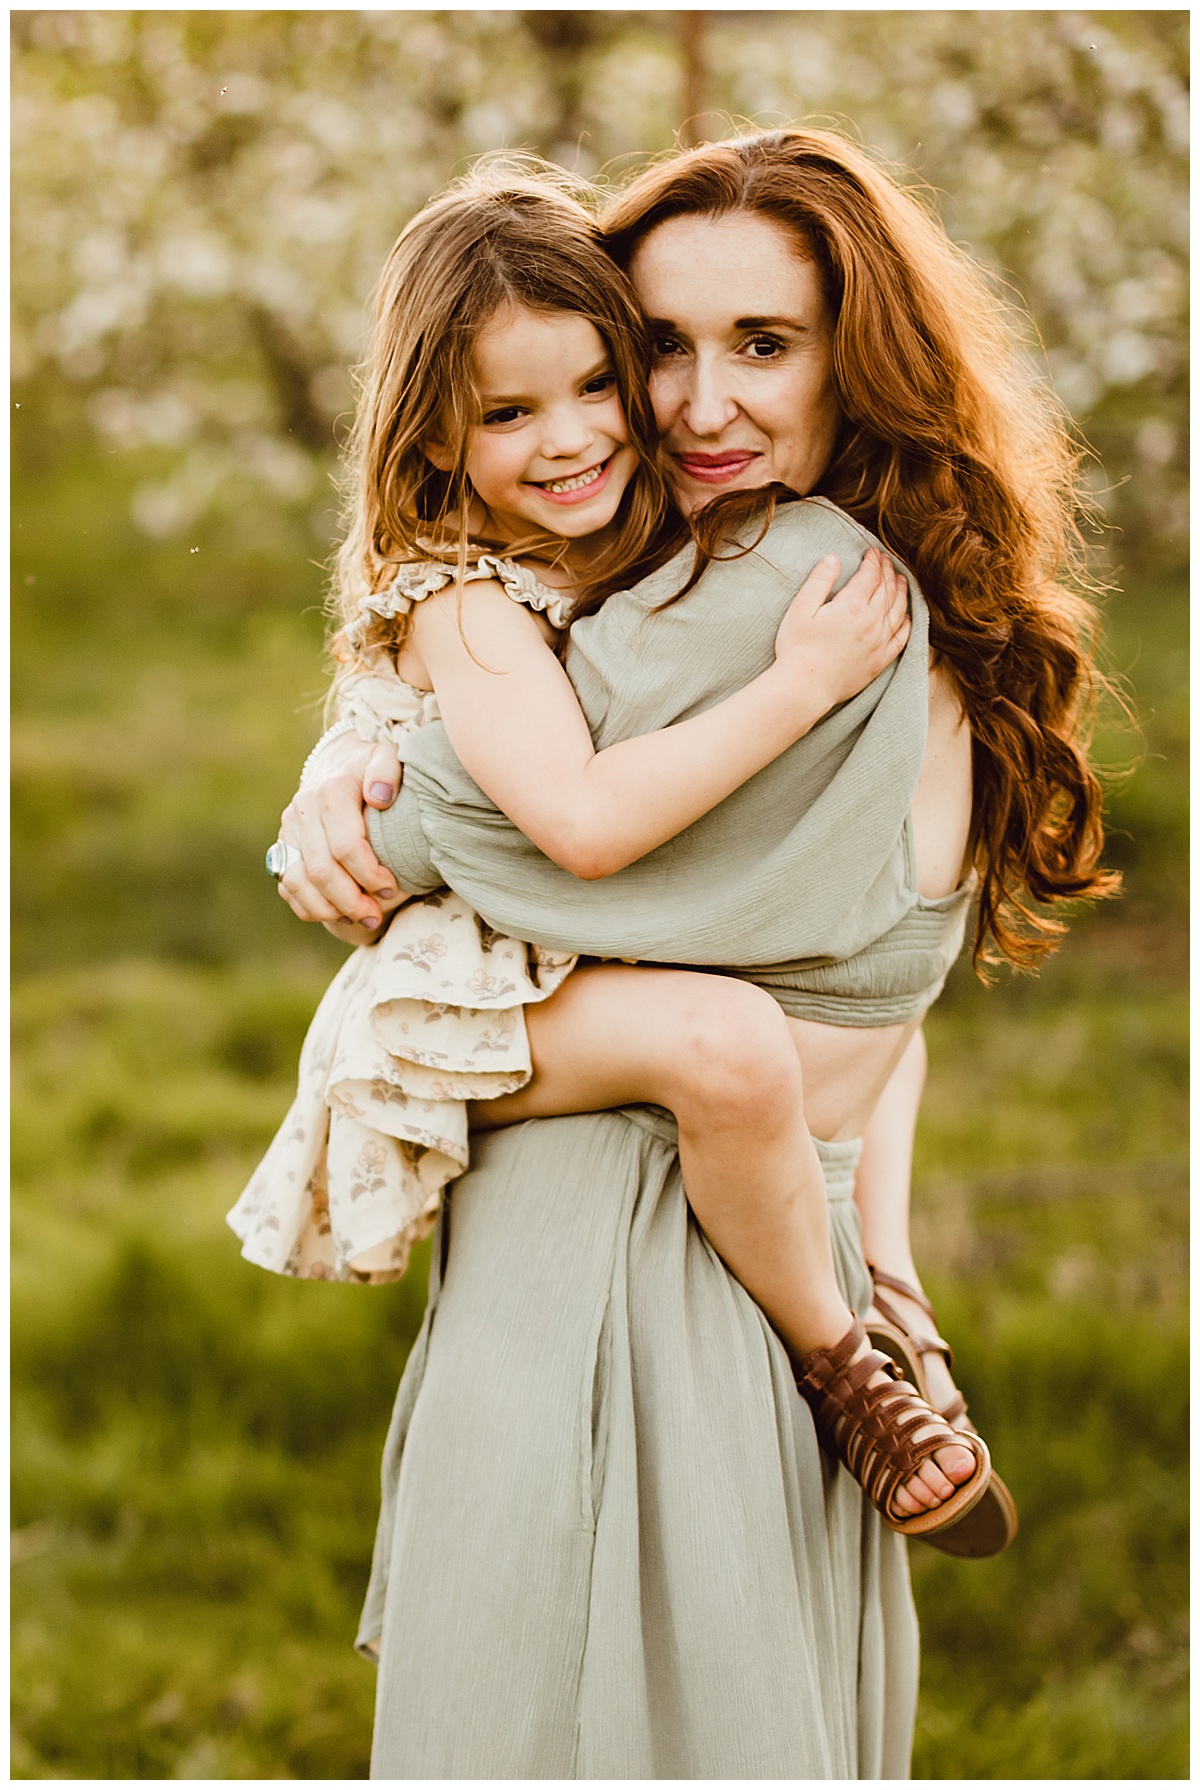 Mom hugs and loves on daughter for Virginia Family Photographer